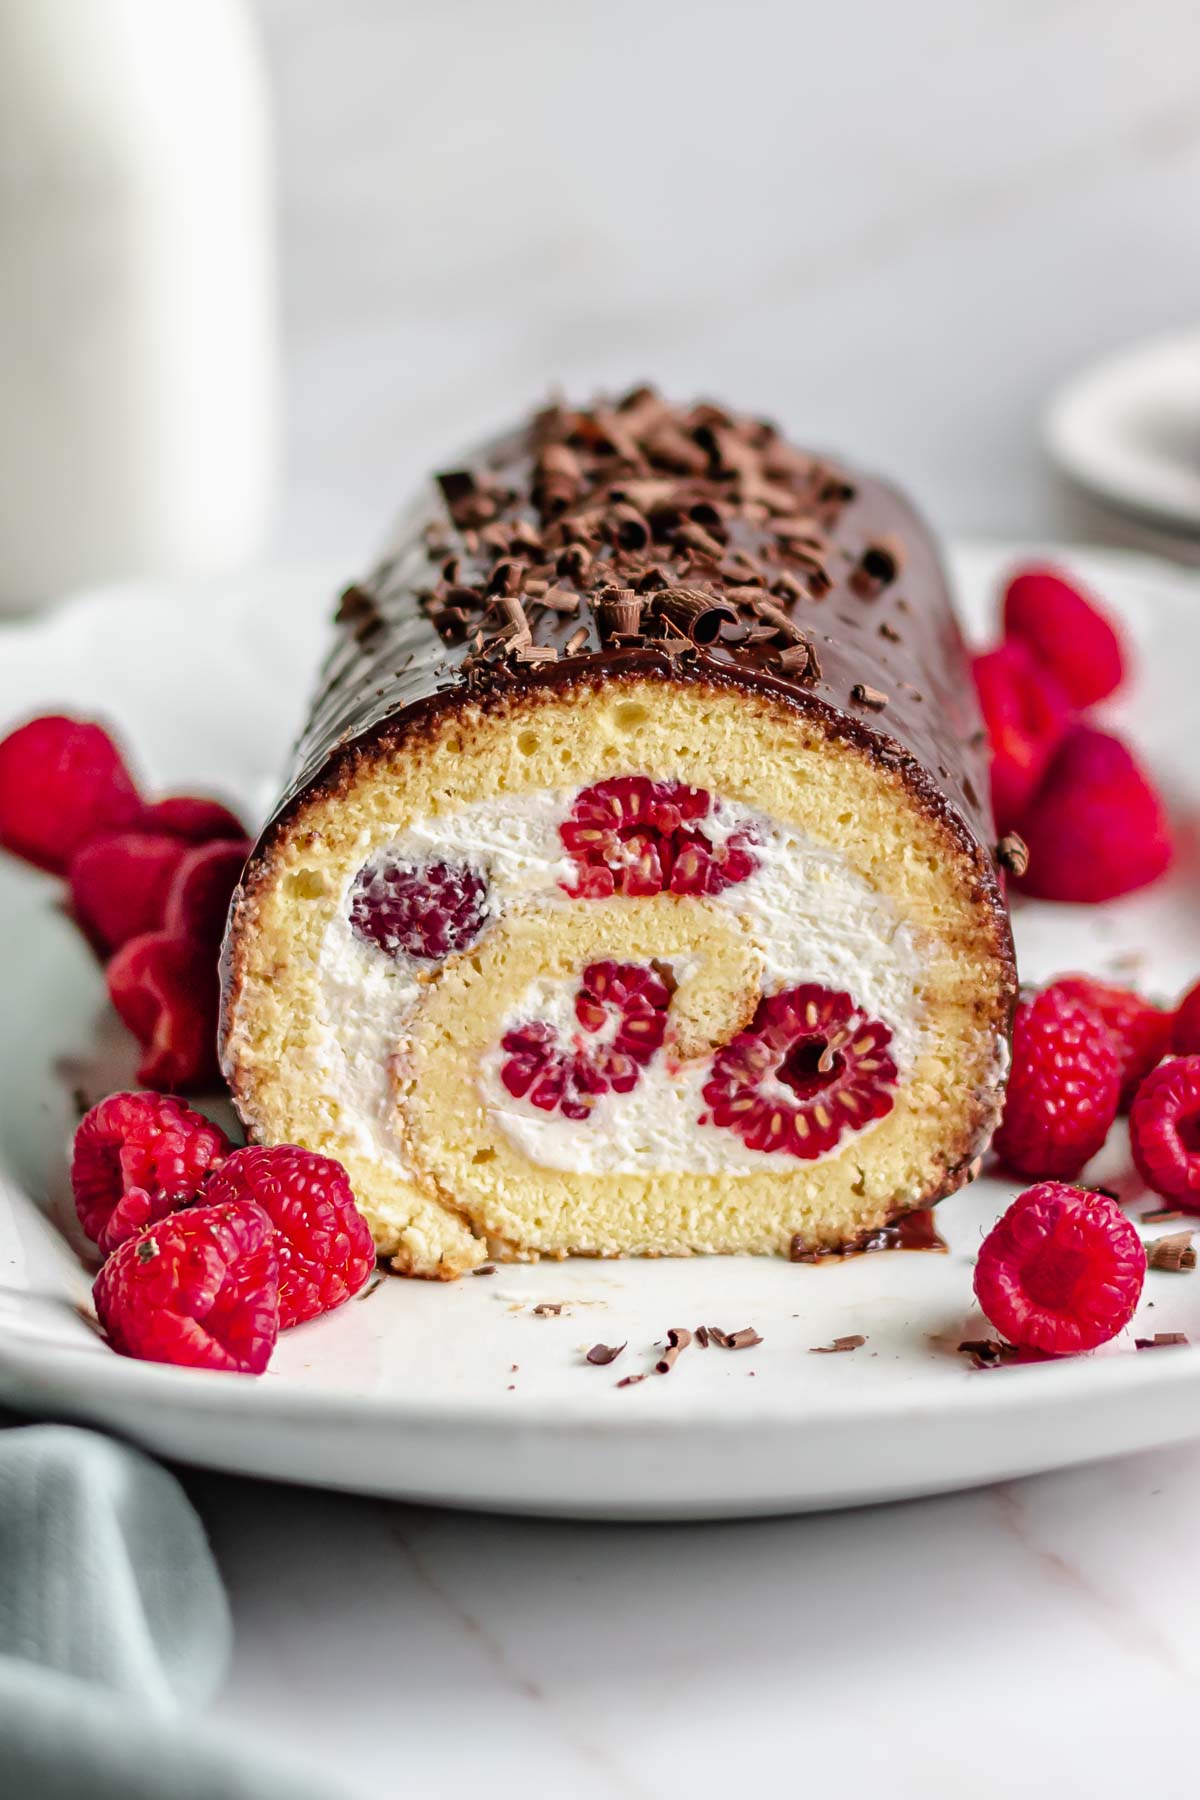 Vanilla Swiss roll with a slice removed to show raspberries inside.